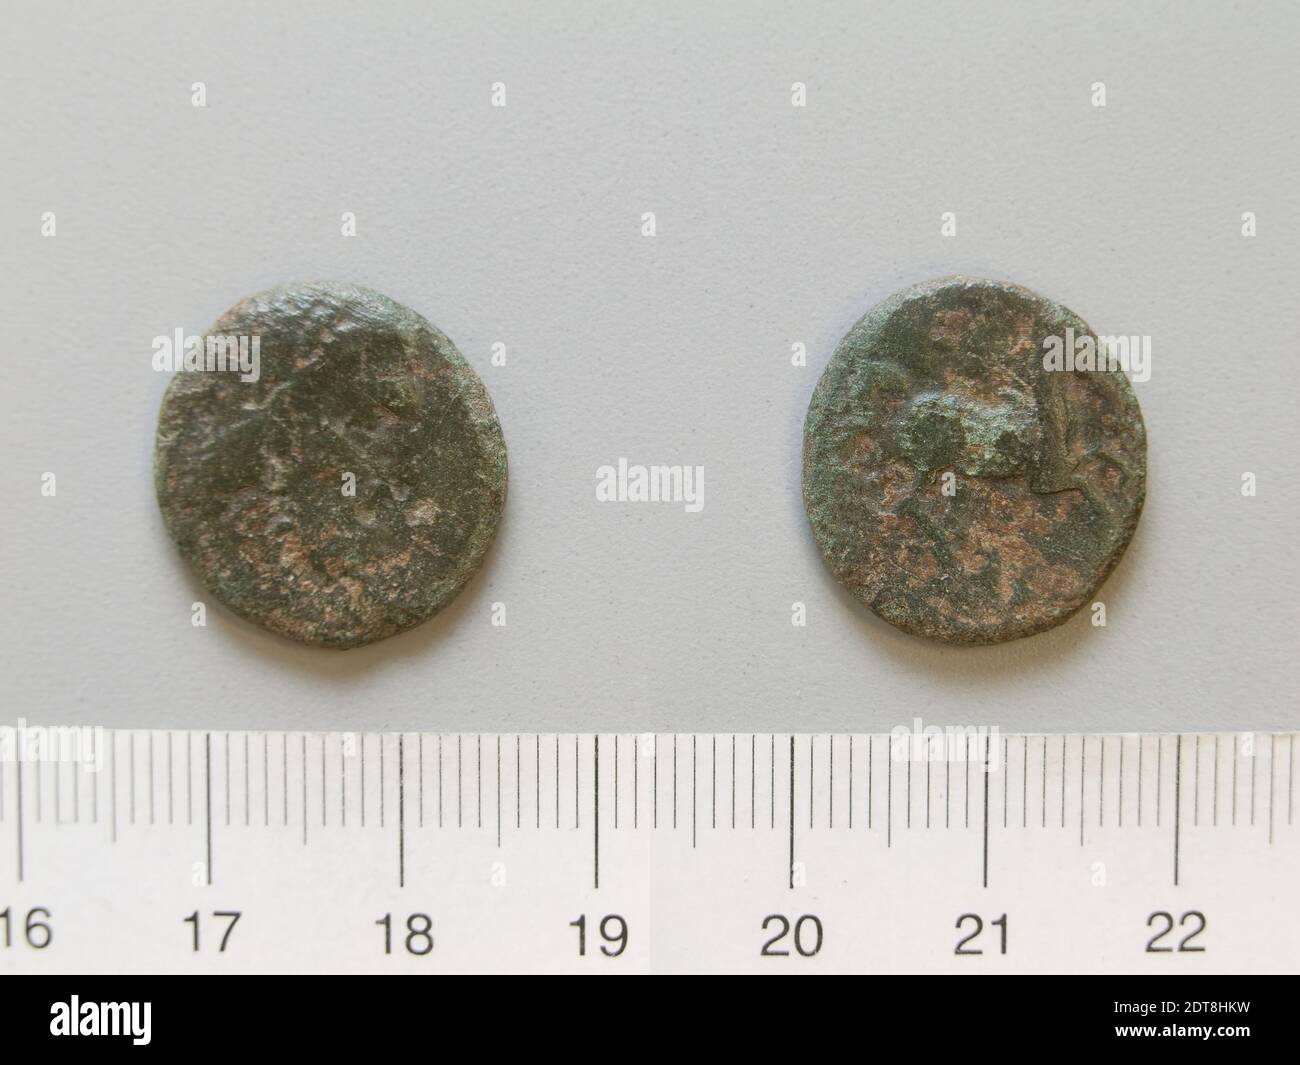 Mint: Elis, Coin from Elis, 271–191 B.C., Copper, 4.20 g, 1:00, 19 mm, Made in Elis, Elis, Greek, 3rd–2nd century B.C., Numismatics Stock Photo